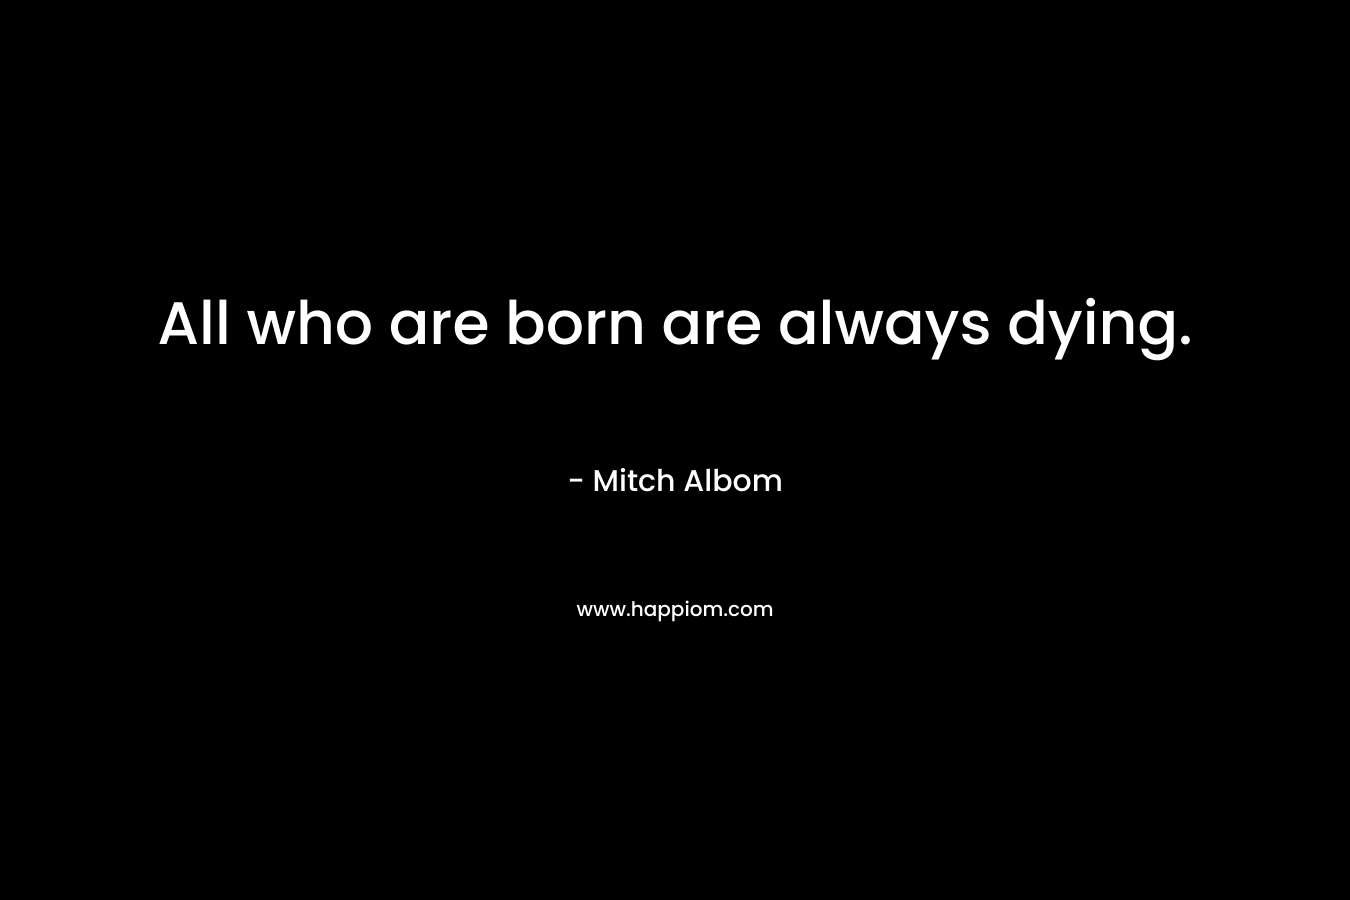 All who are born are always dying.